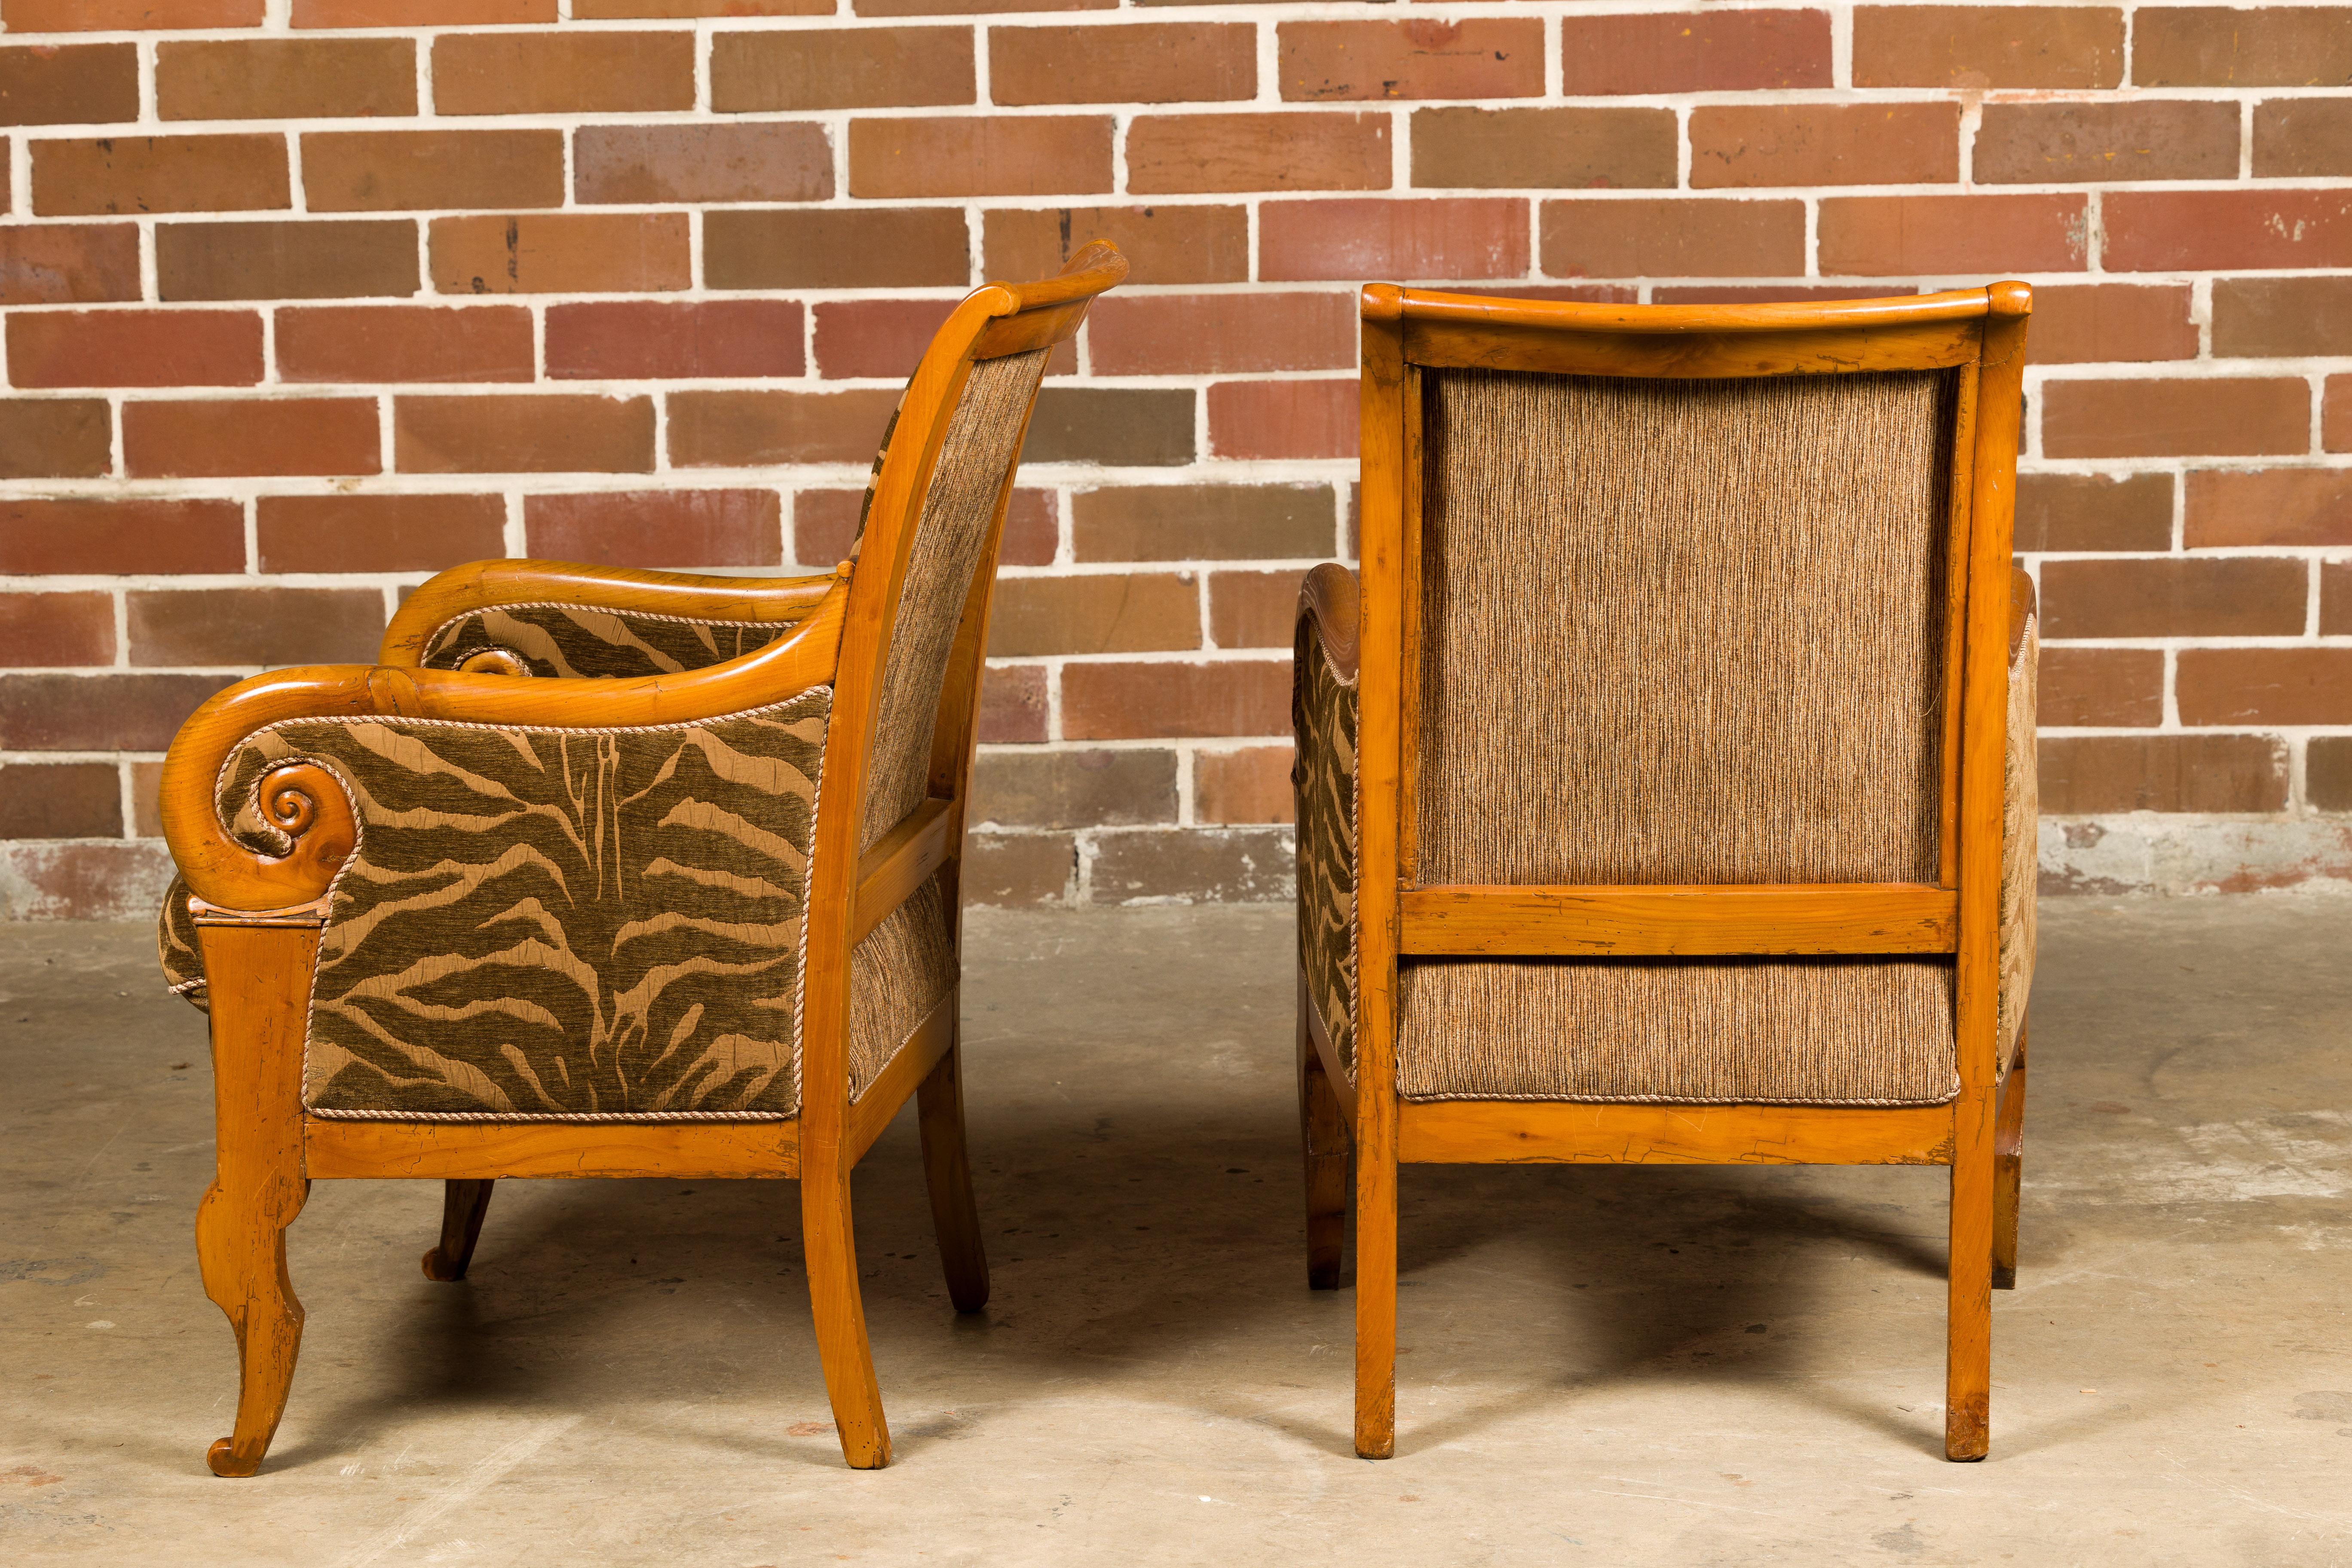 French Walnut 19th Century Bergère Chairs with Carved Arms and Zebra Upholstery For Sale 1